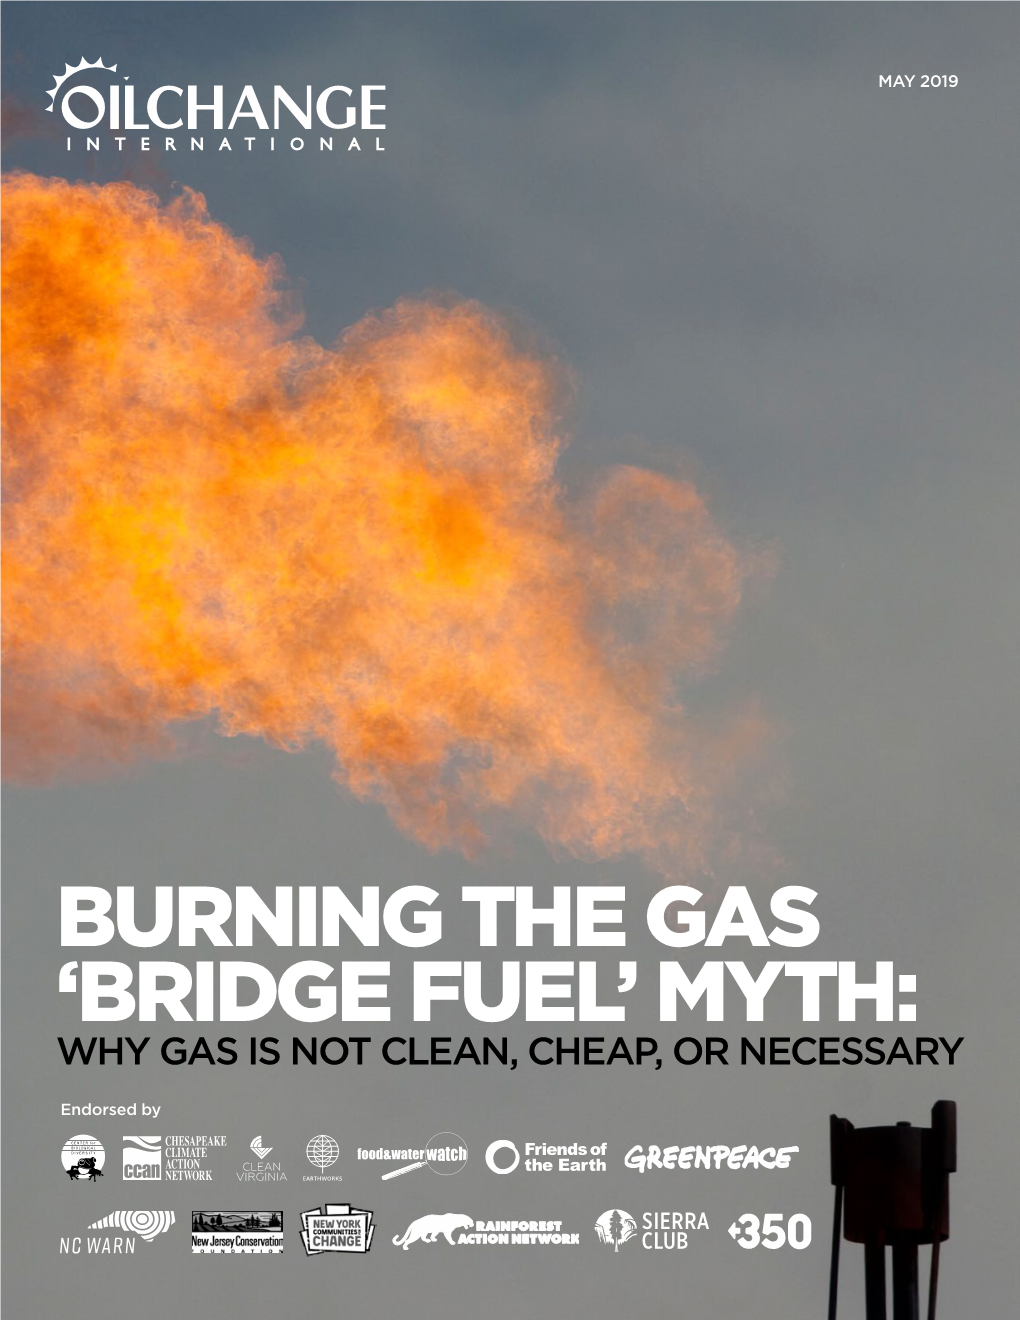 Bridge Fuel’ Myth: Why Gas Is Not Clean, Cheap, Or Necessary